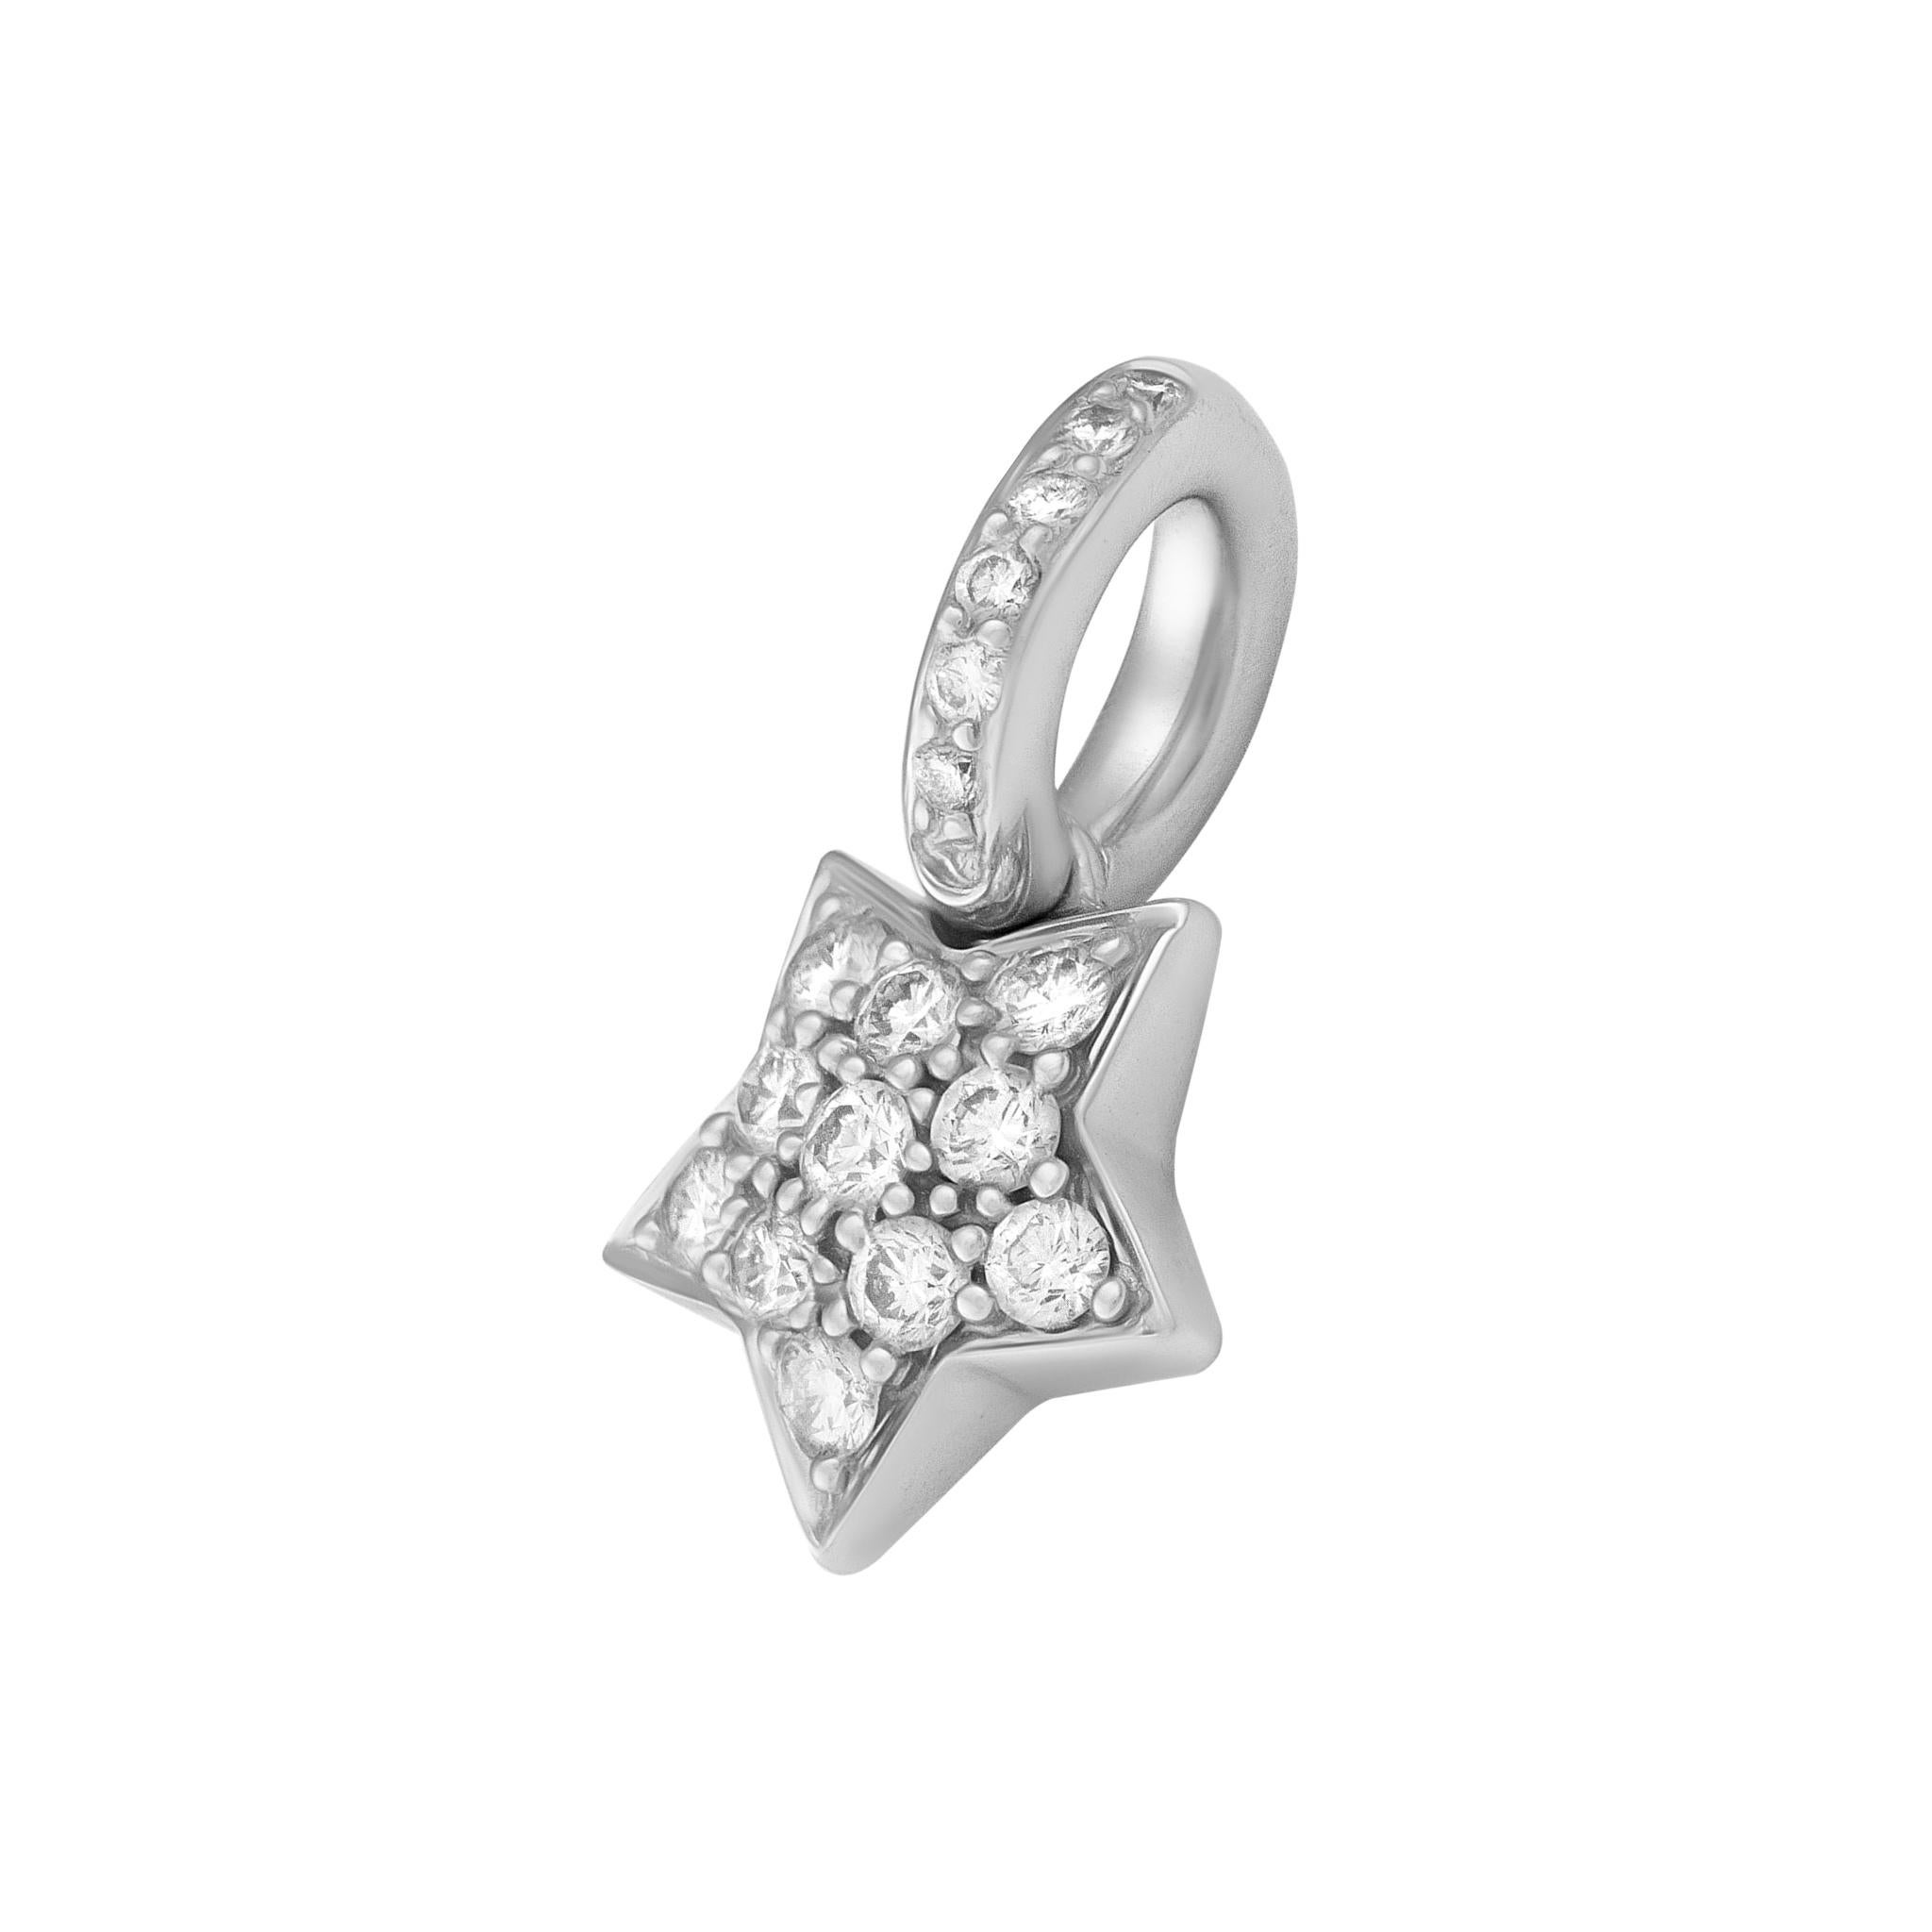 Pave Star Charm
Diamond: 0.28ctw
Reference number: ABS01055